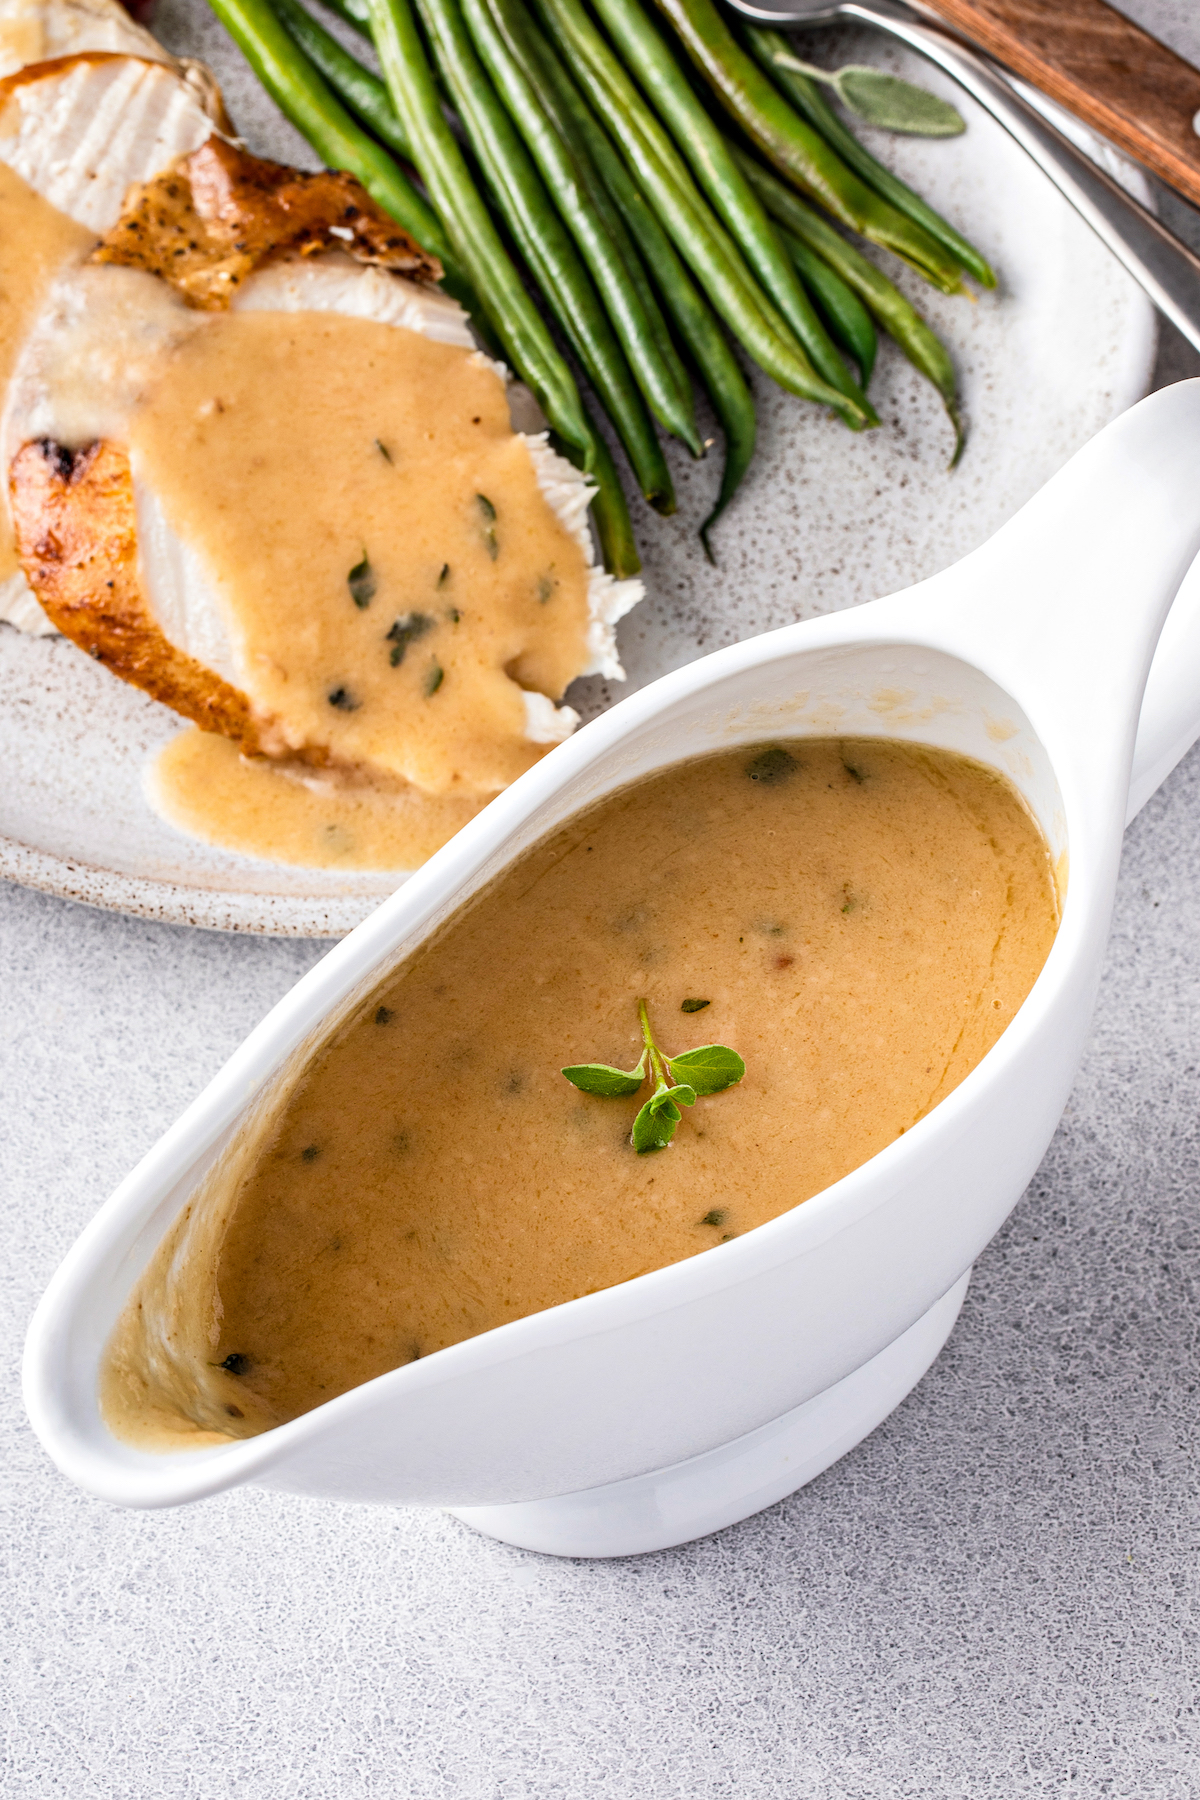 Made-from-scratch gravy in a gravy serving dish.